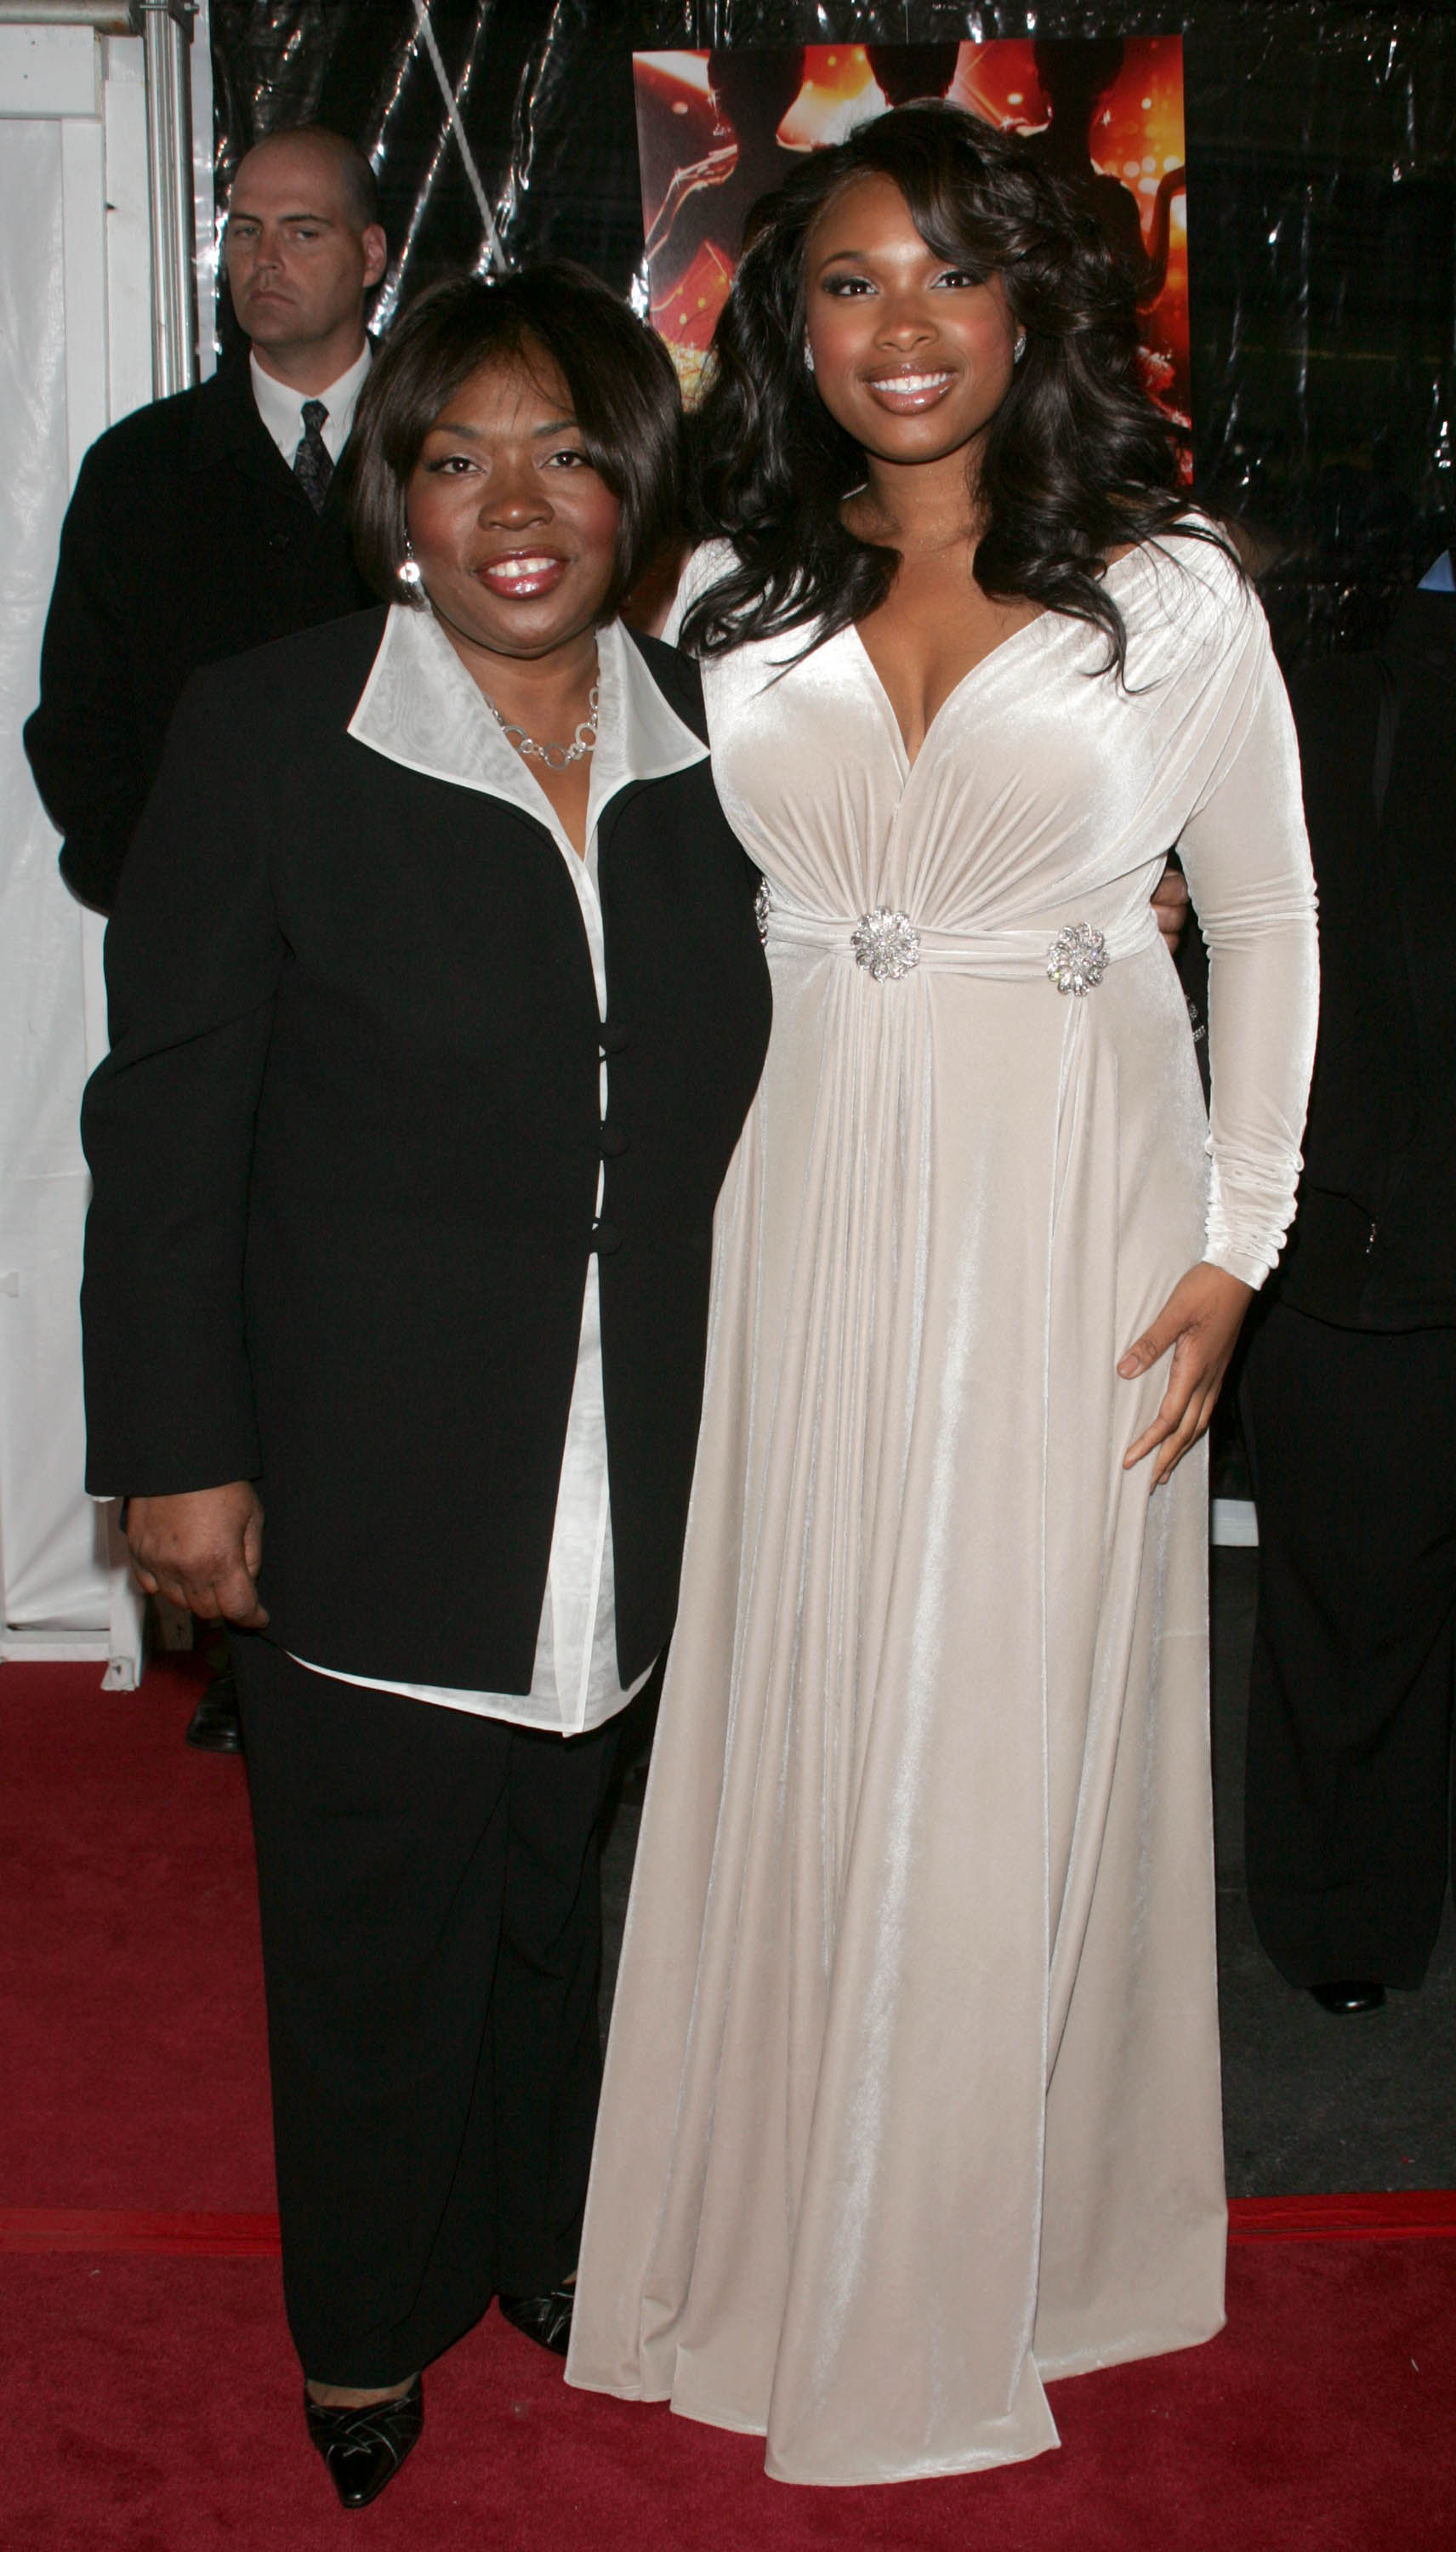 Jennifer Hudson at an event with her mother Darnell Donerson at the Ziegfeld Theater in New York City. | Source: Getty Images